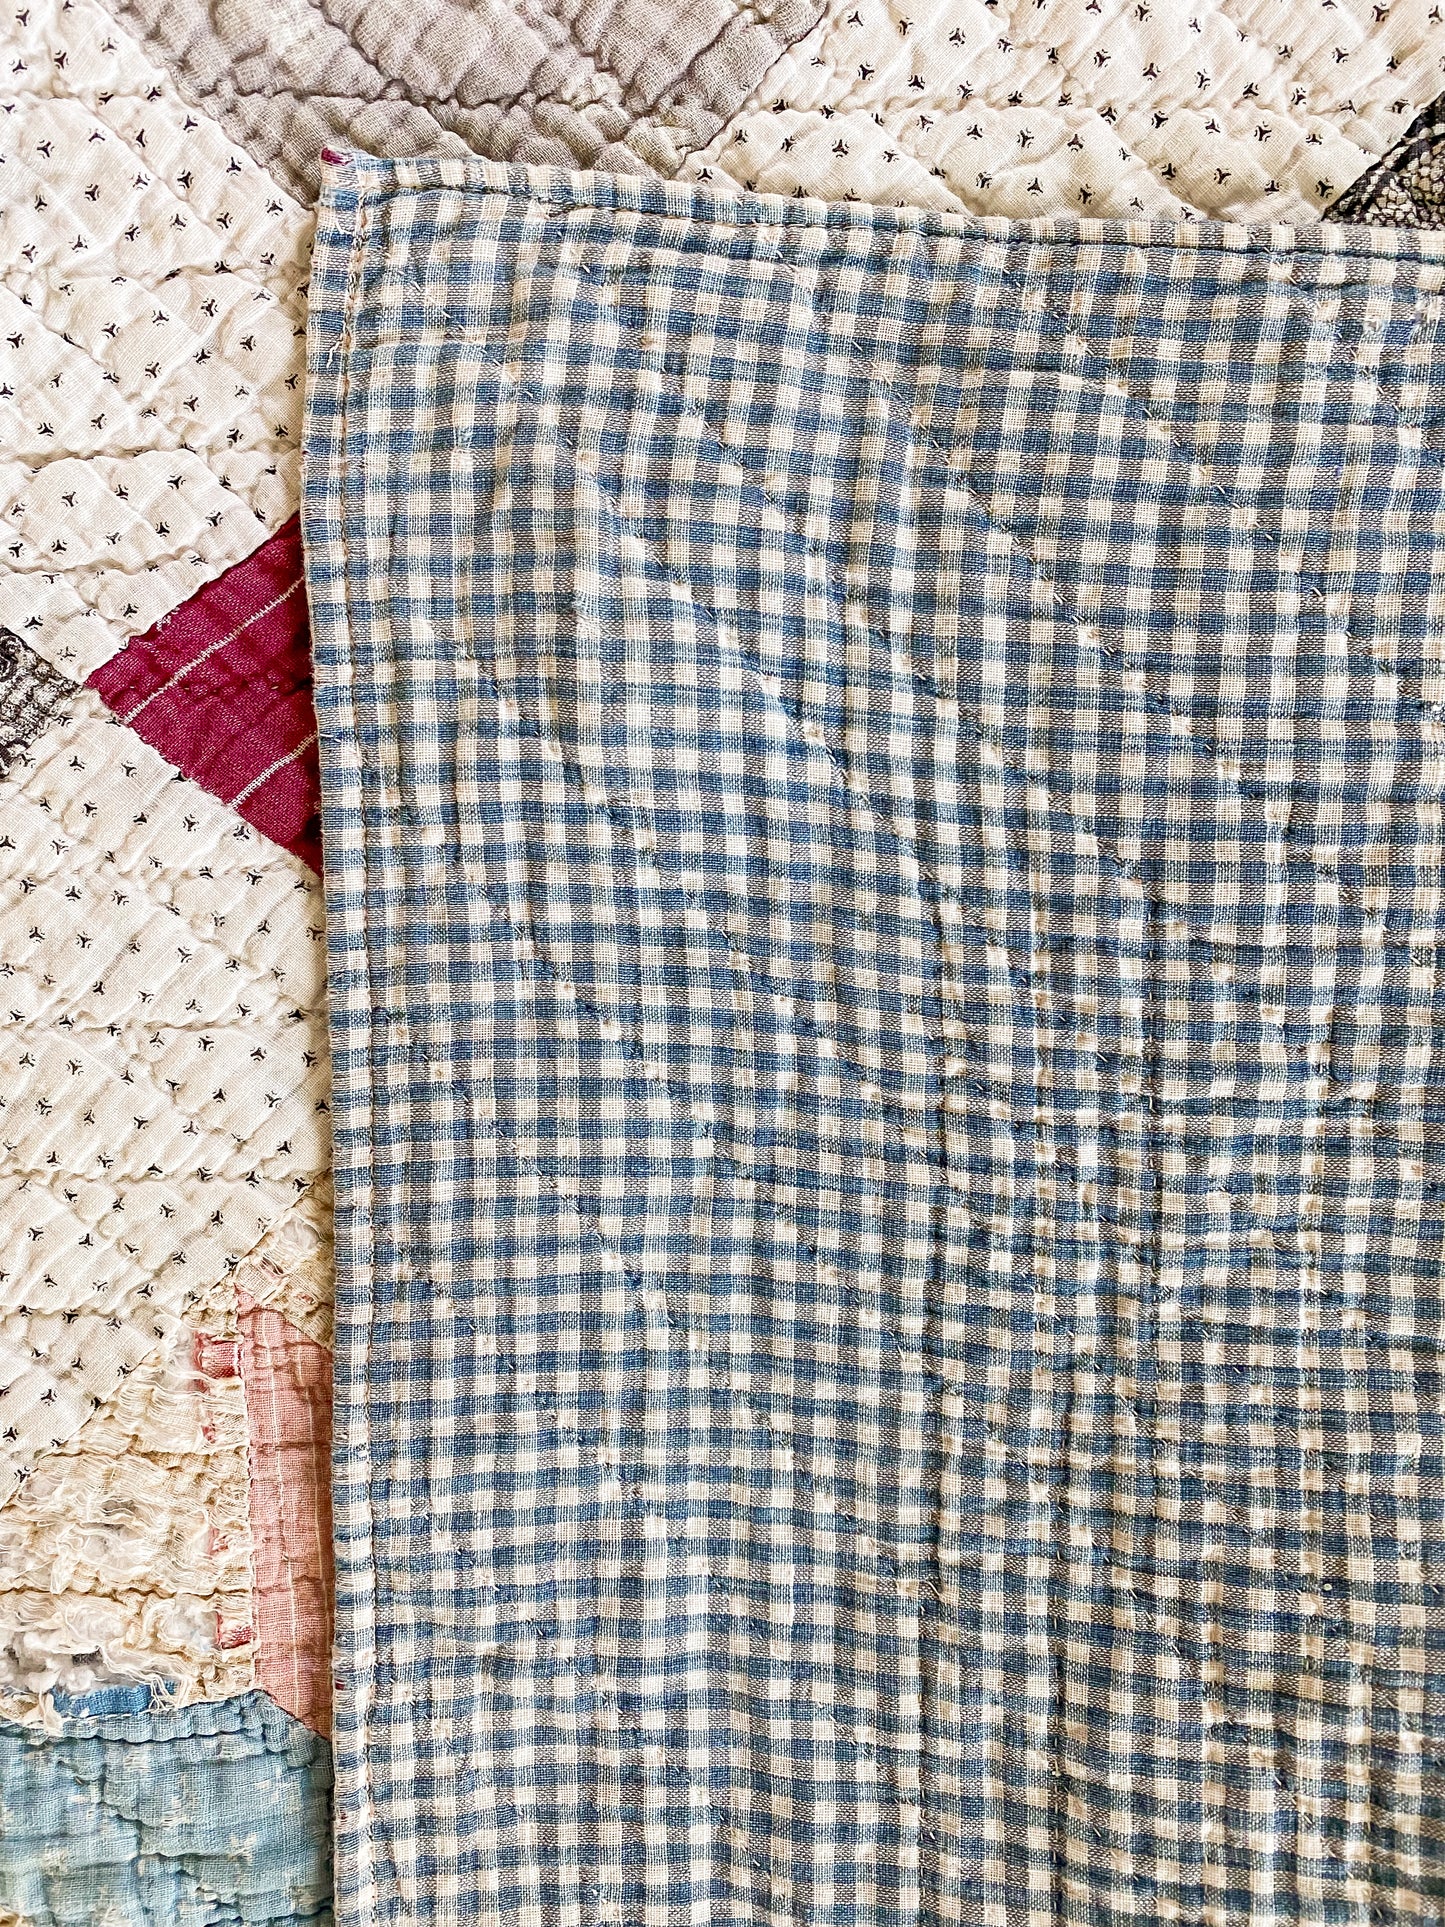 Antique Red and Blue Basket Quilt | Cutter Stacking Quilt